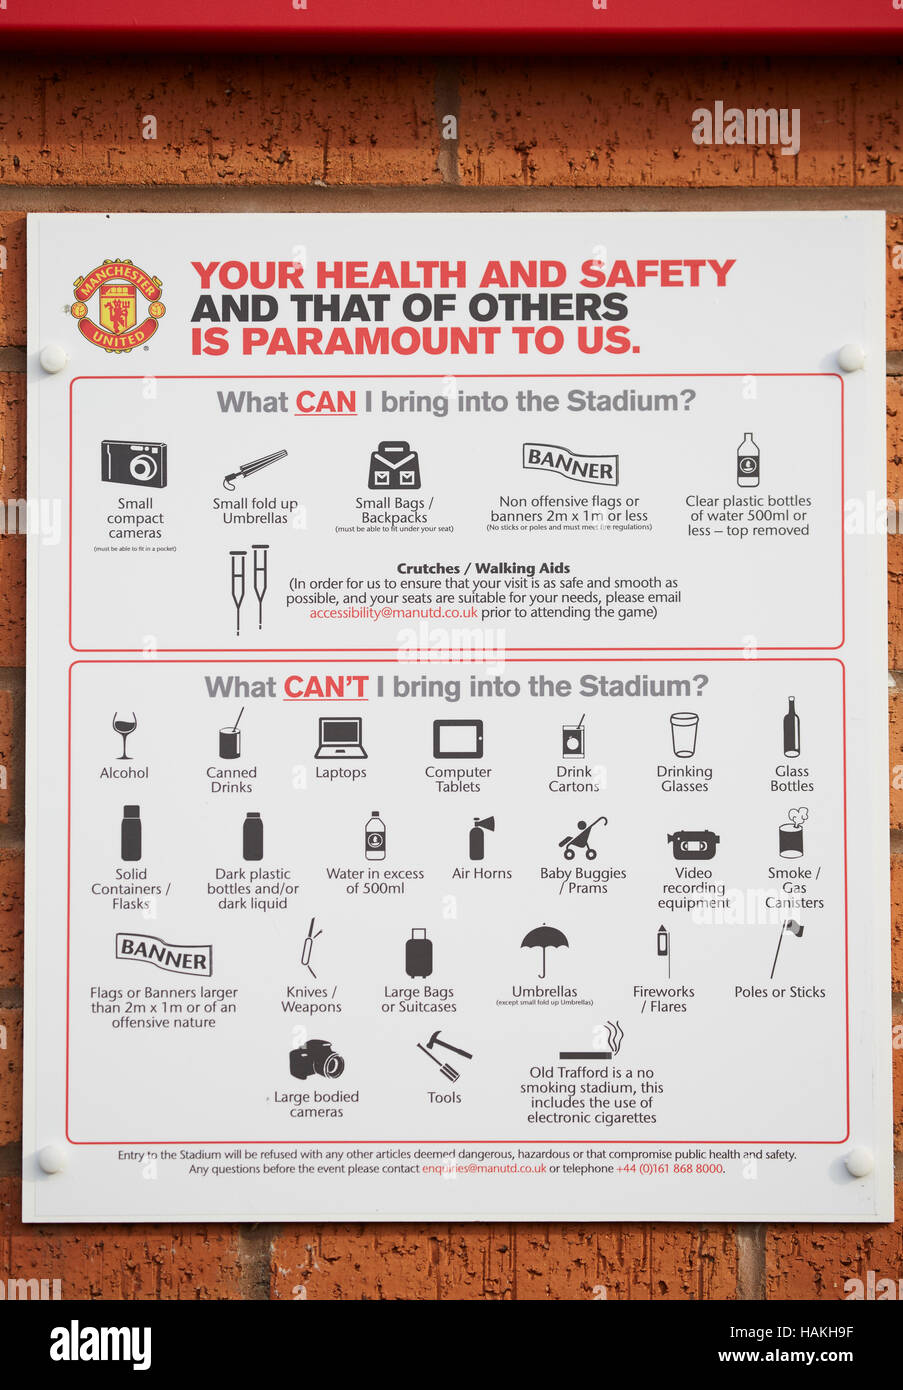 Manchester United Sir warning notice   MUFC stadium Old Trafford football club health safety notice bring in can't banned items articles sign displaye Stock Photo